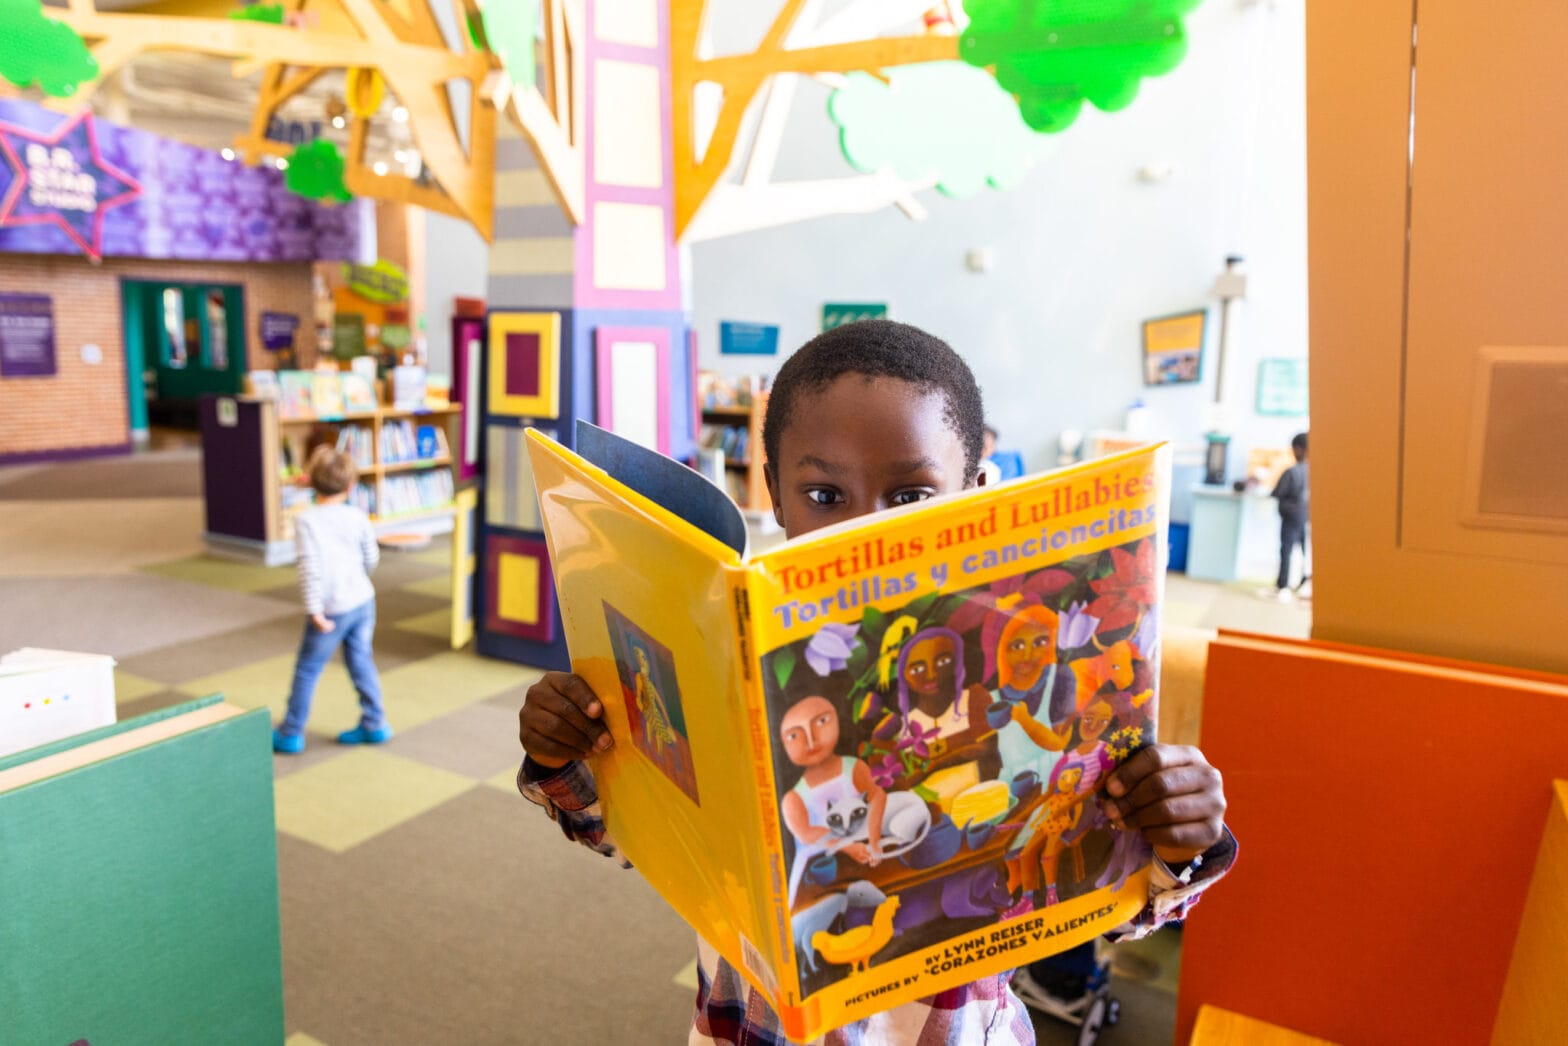 A child holding an open book and reading in the Story Tree area.